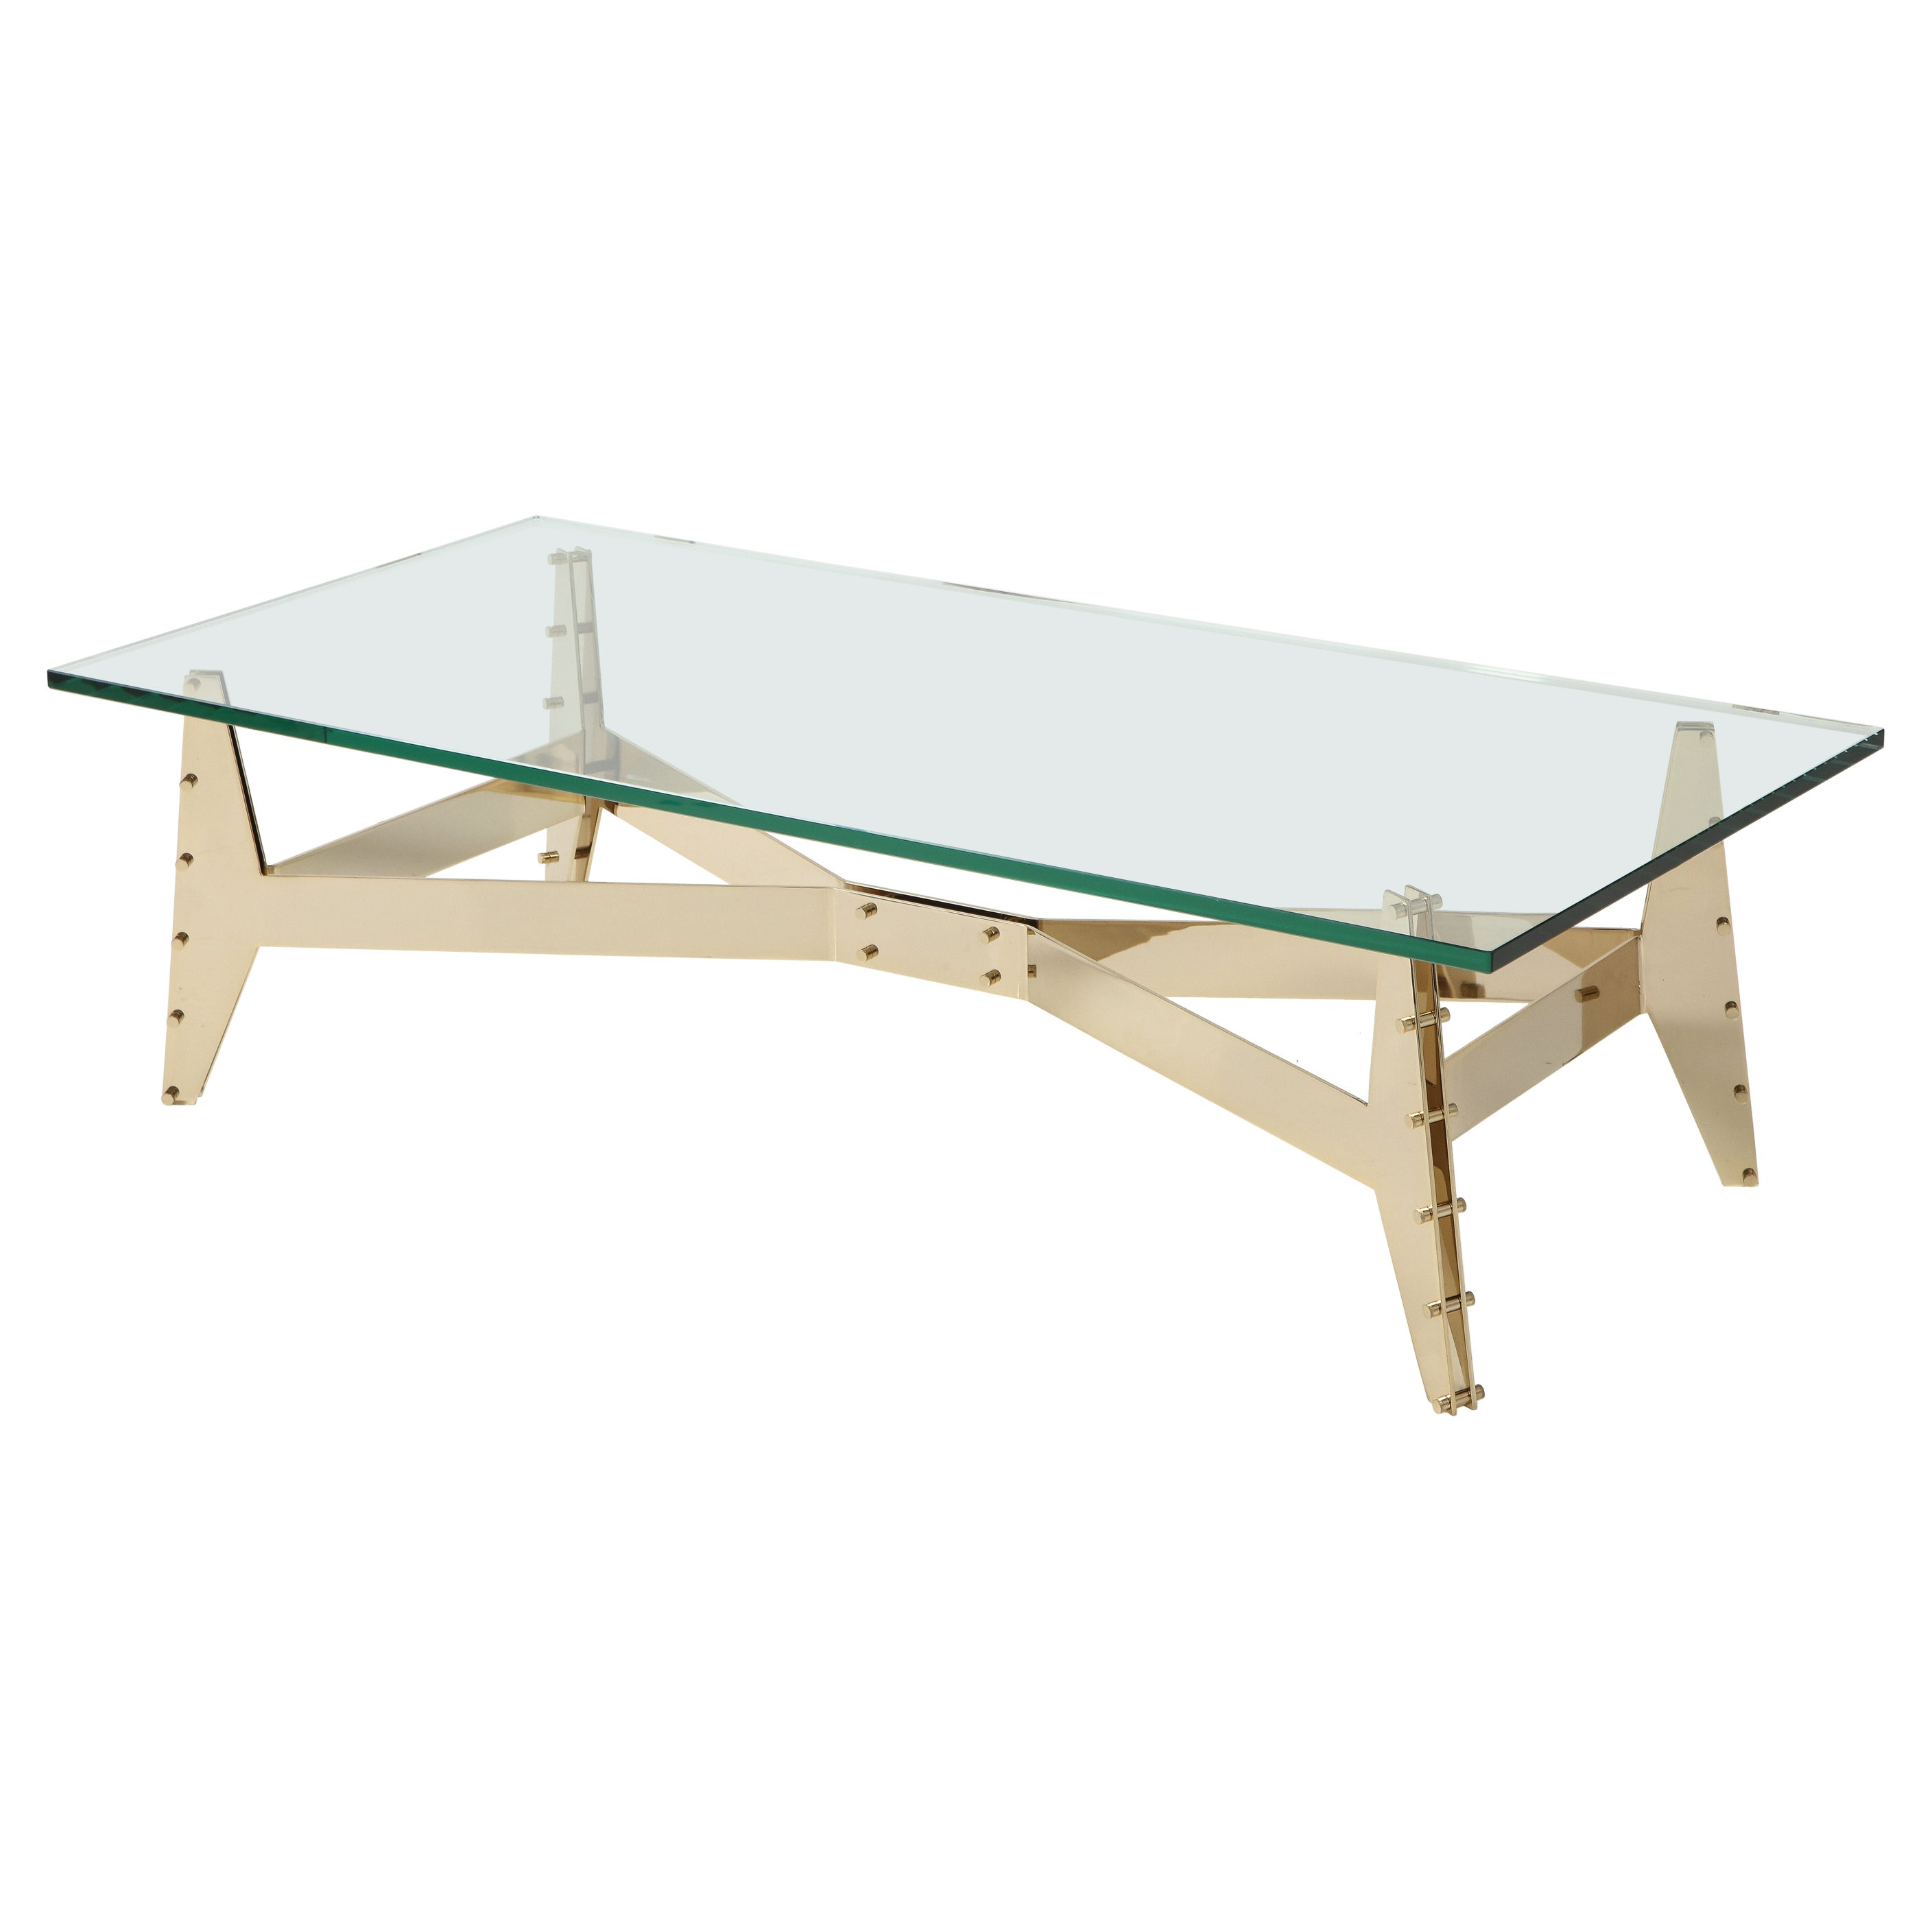 Italian Architectural Base Modernist Coffee Table with Glass Top For Sale